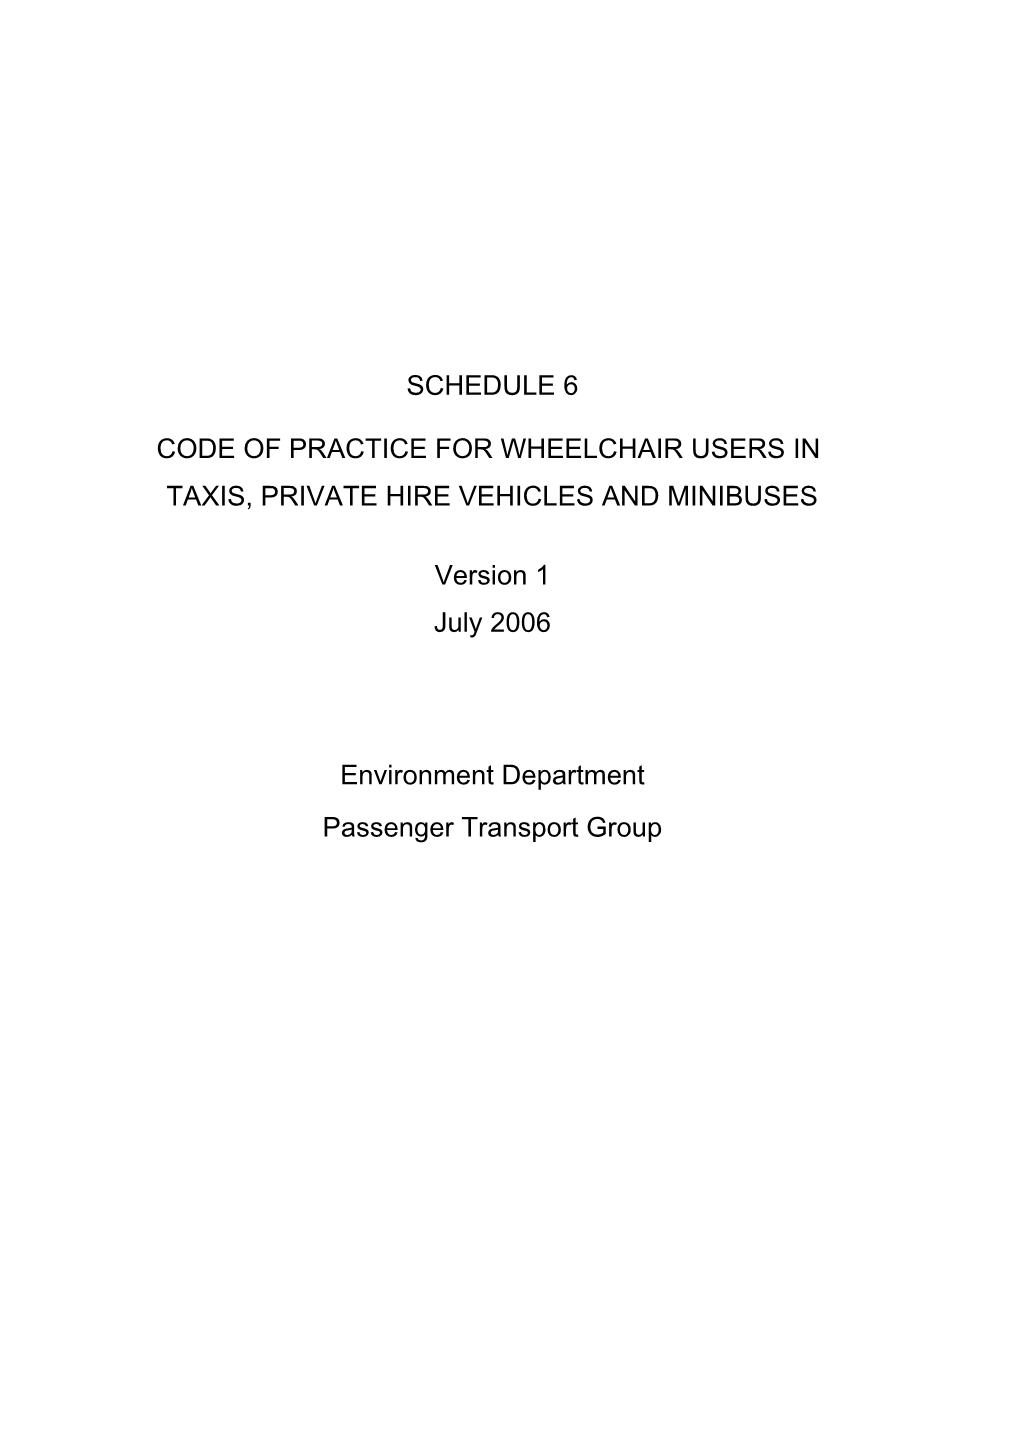 Code Of Practice For Wheelchair-Users - Version 1 - January 2006